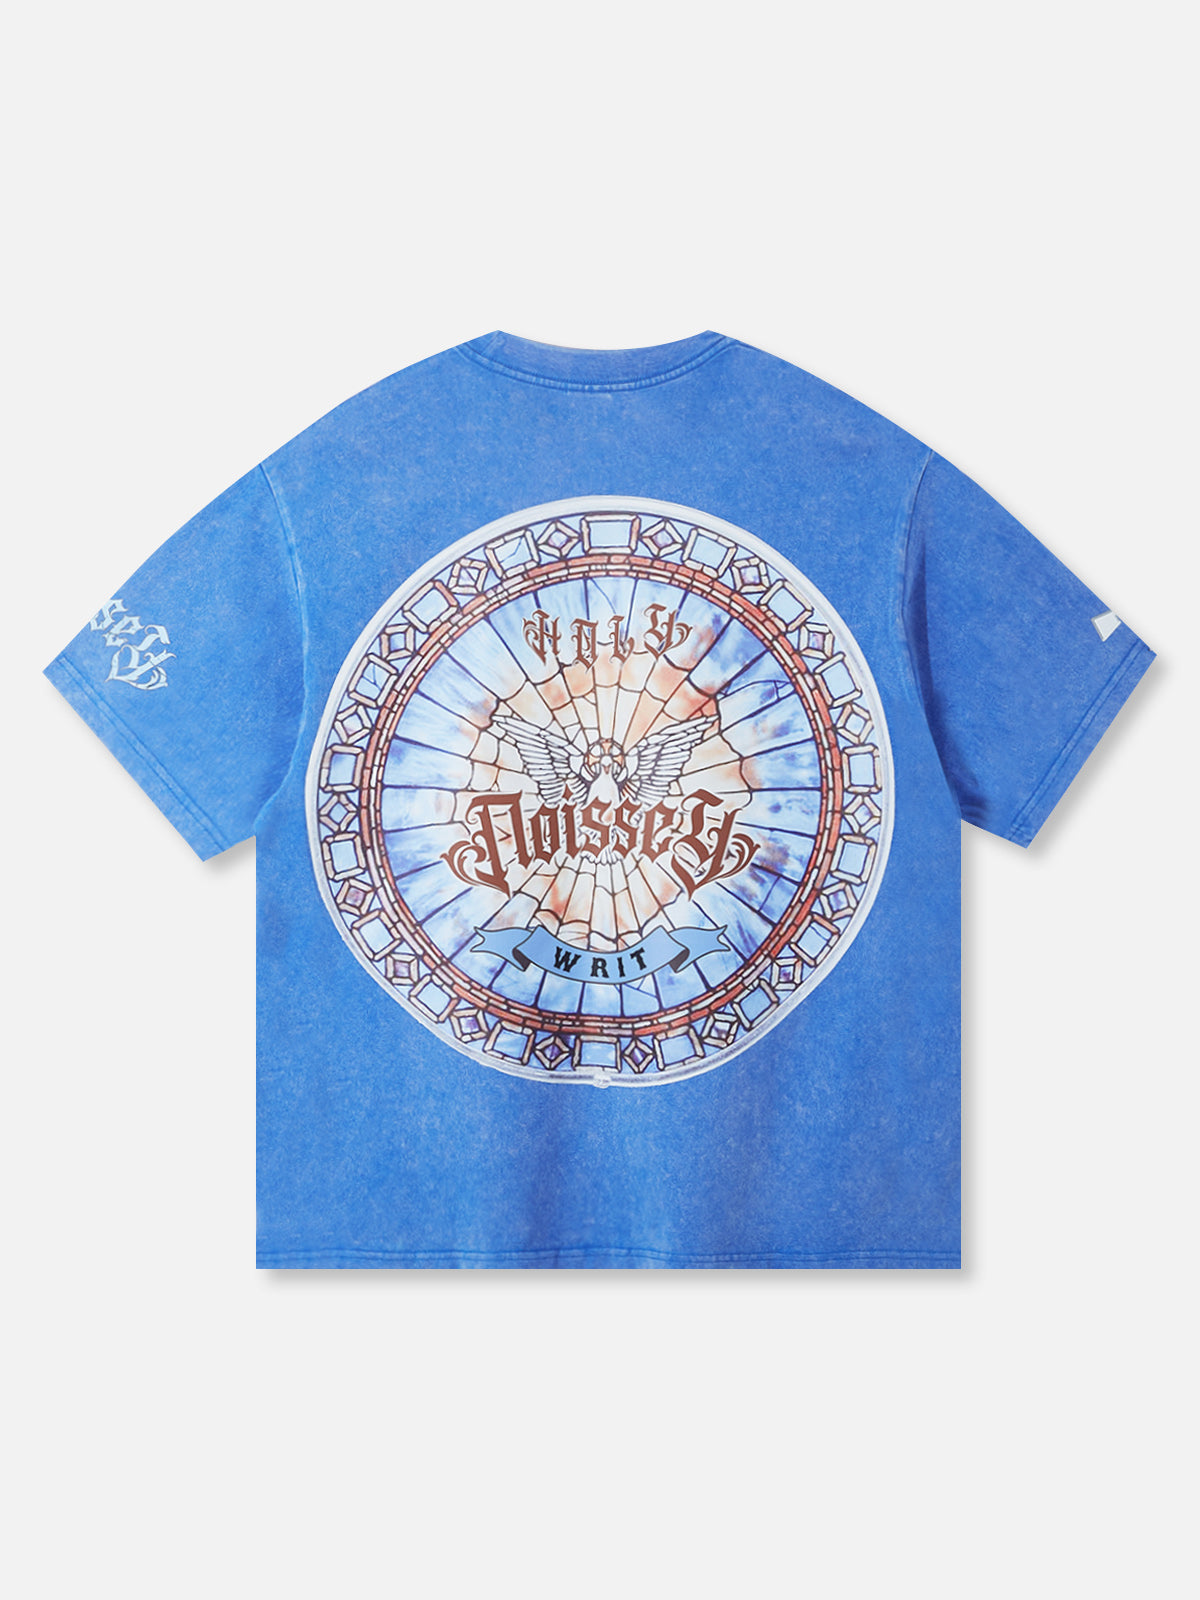 OBSTACLES & DANGERS© Ocean Blue Stained Glass T-Shirt